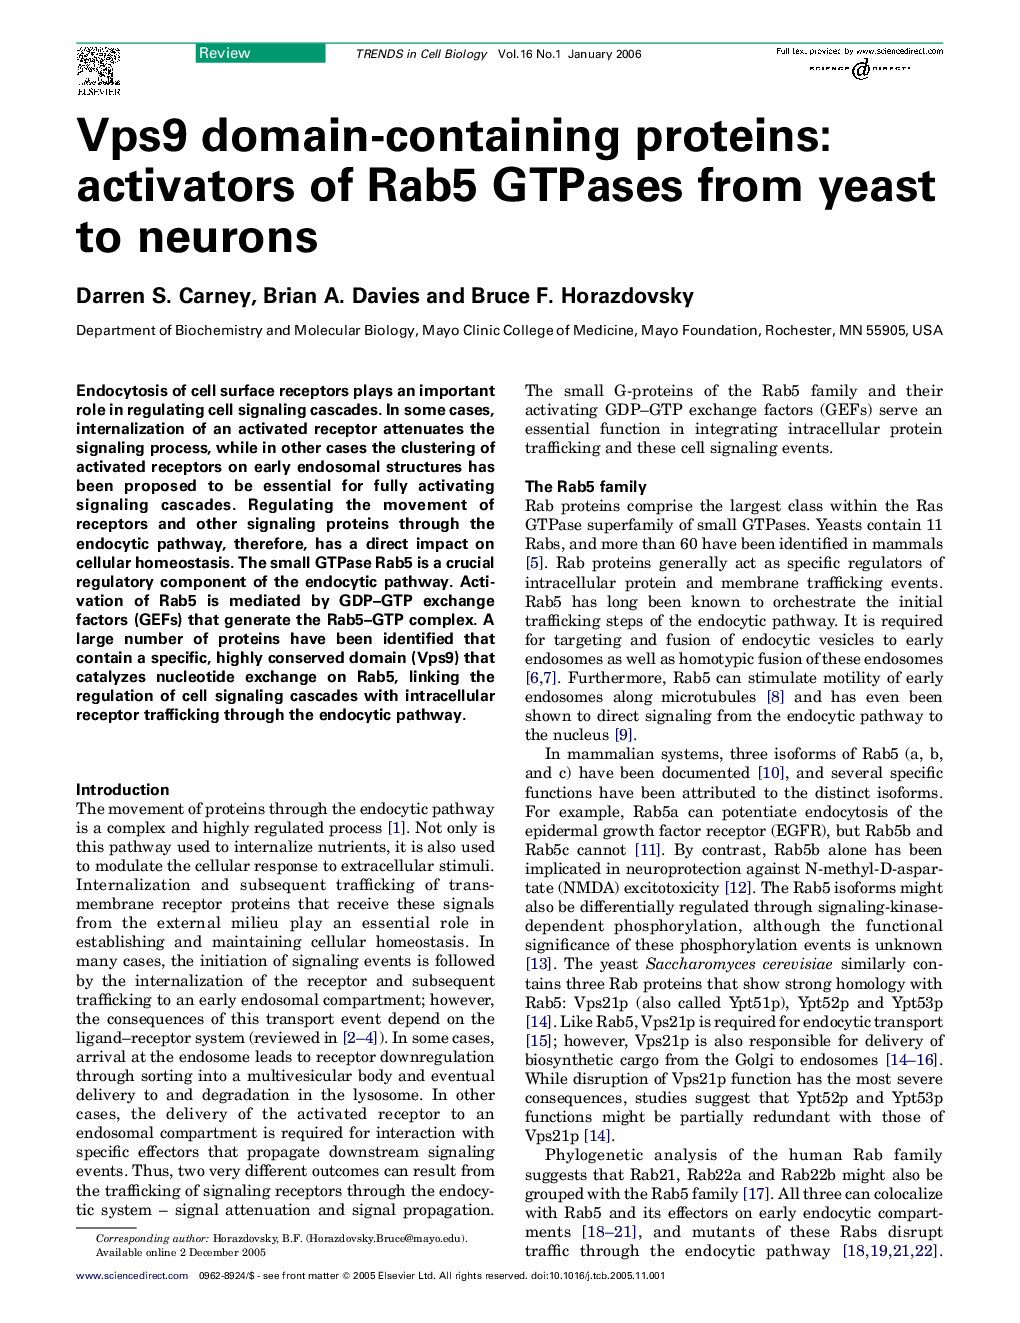 Vps9 domain-containing proteins: activators of Rab5 GTPases from yeast to neurons